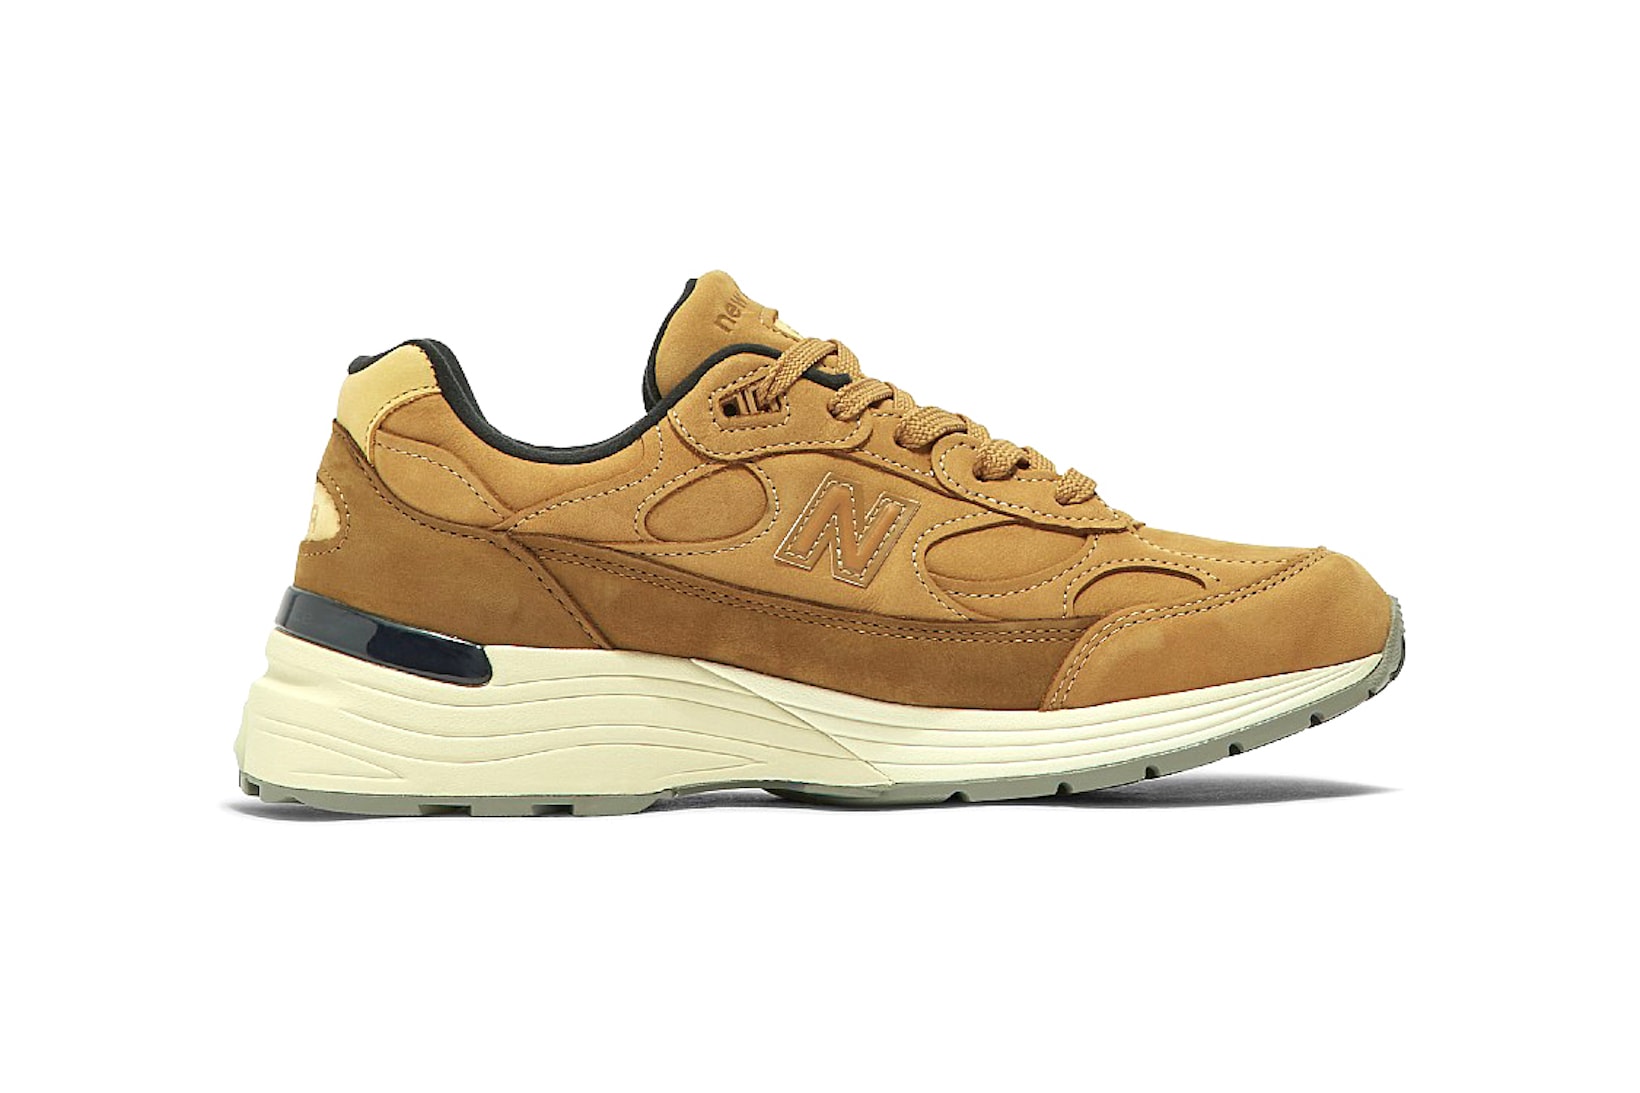 new balance 992 gold brown white sneakers footwear shoes kicks sneakerhead lateral